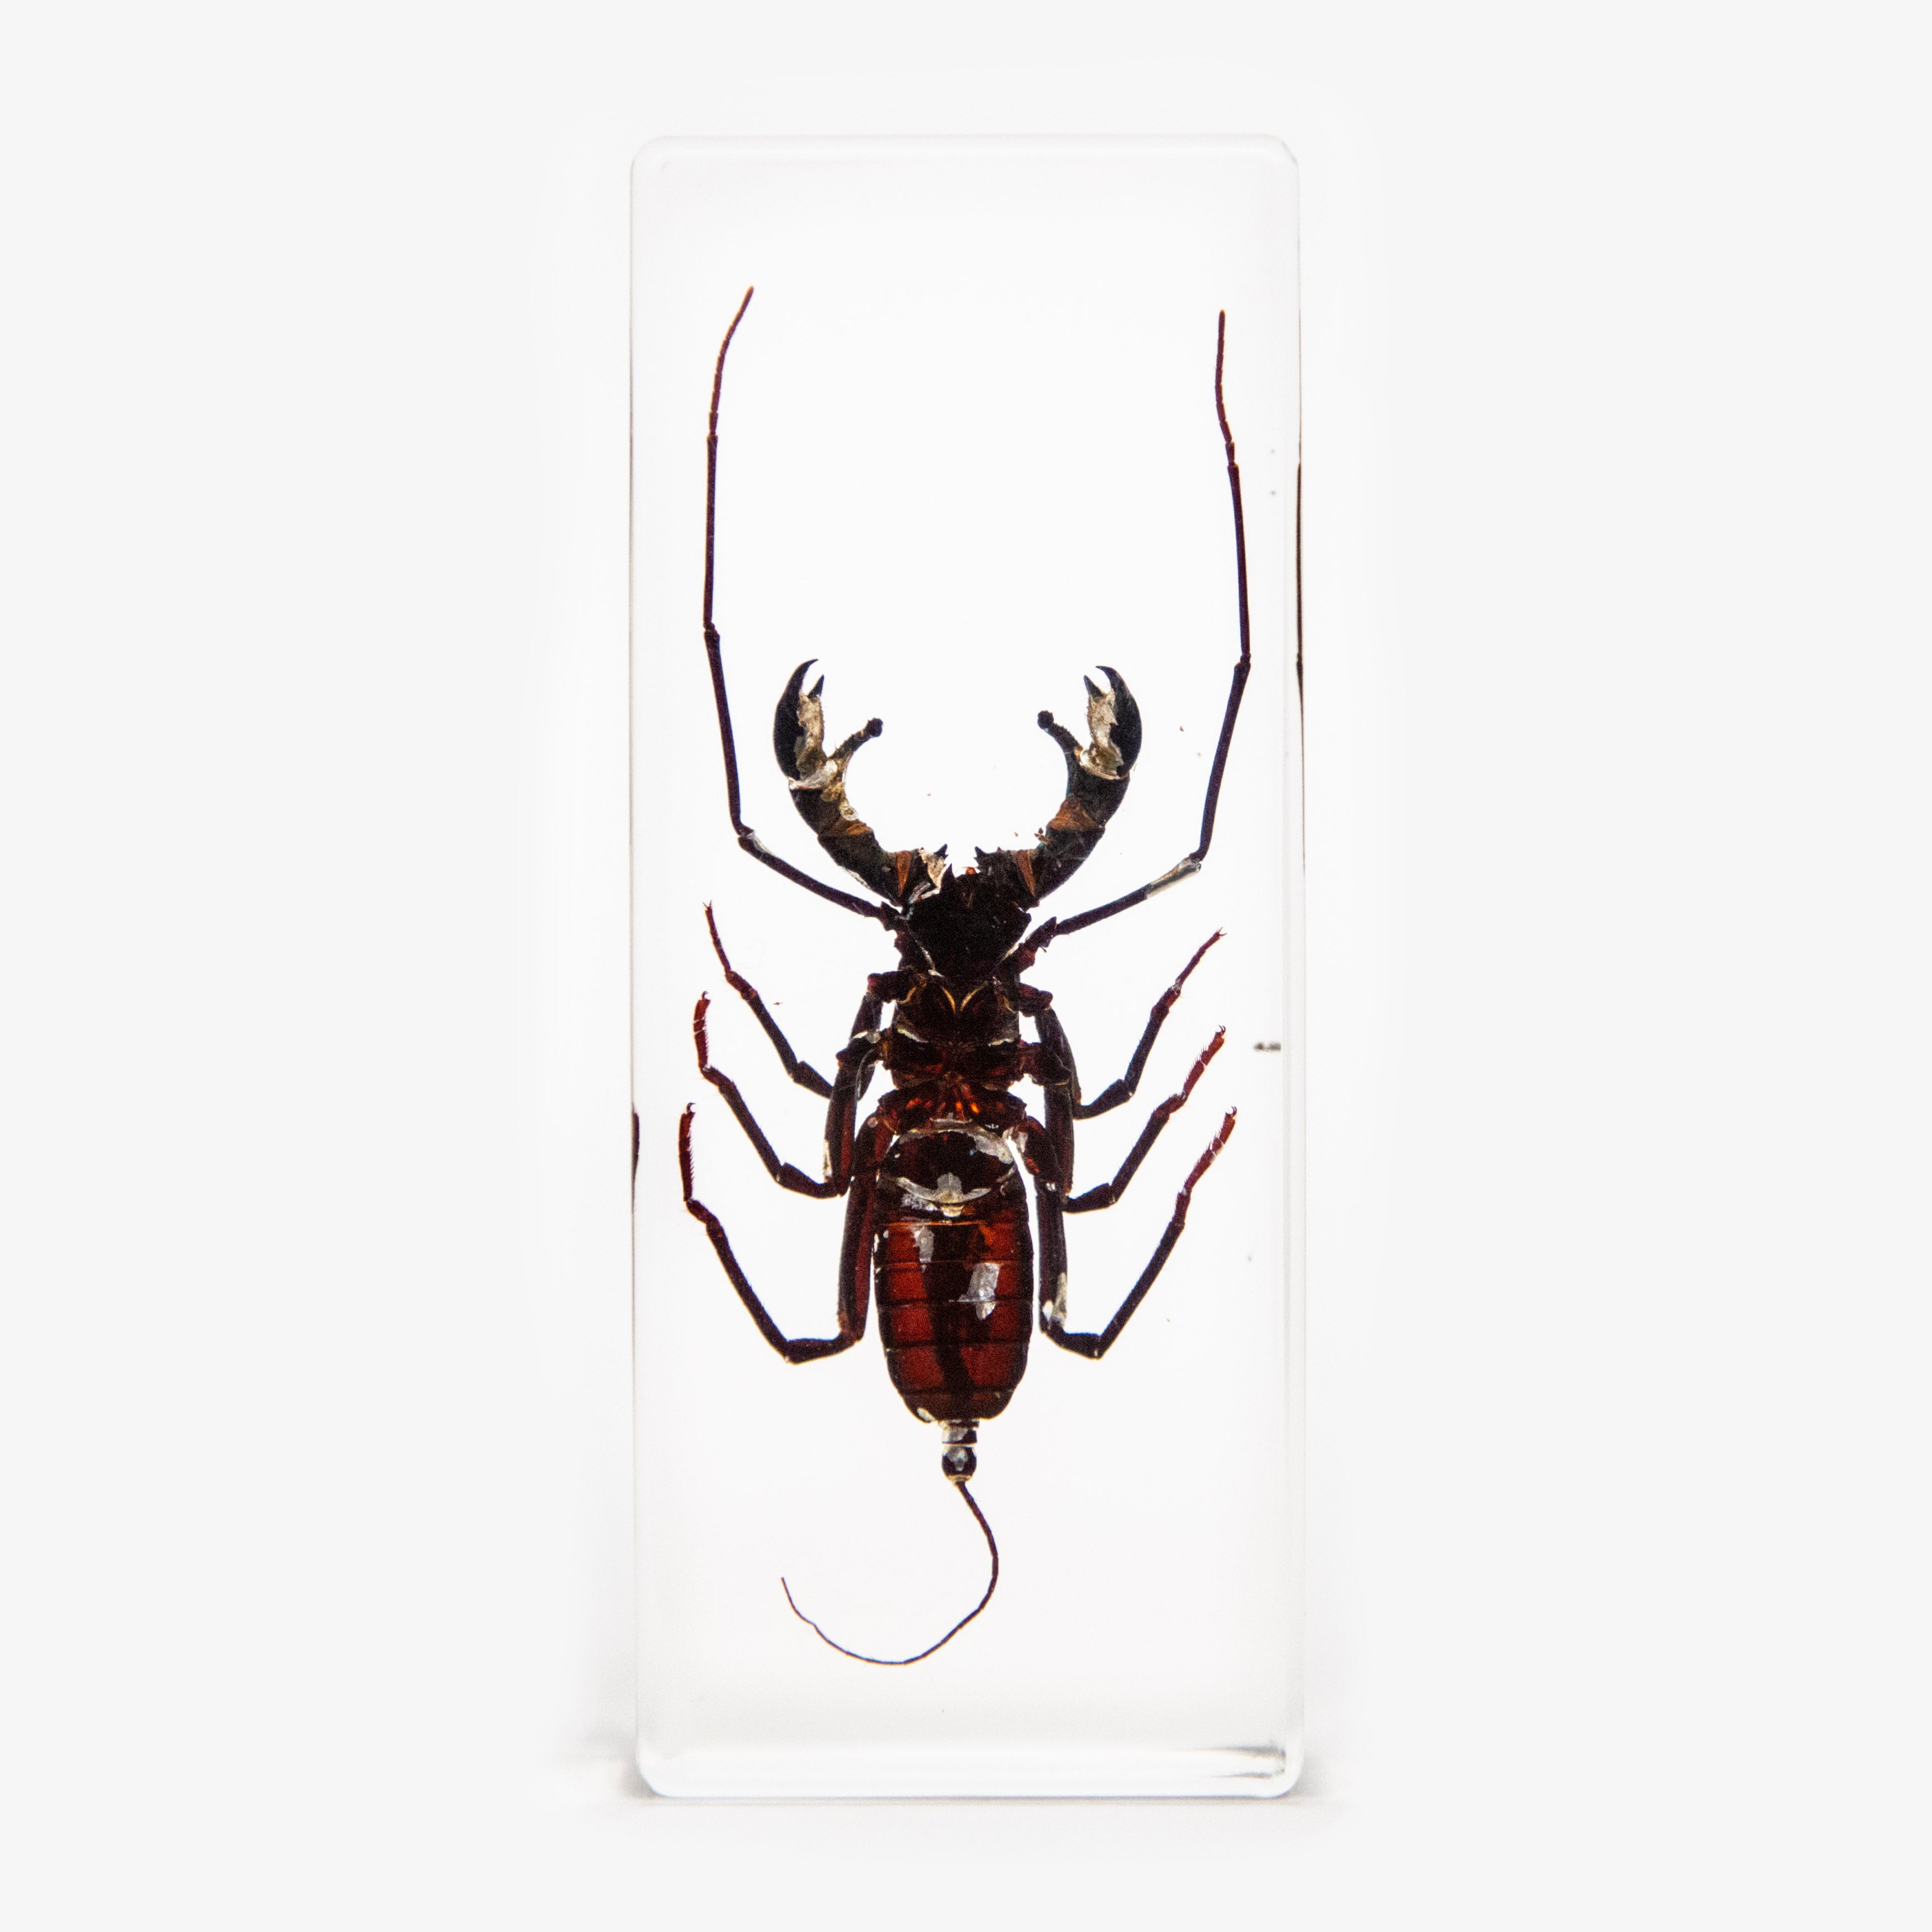 Whip Scorpion Resin Paperweight